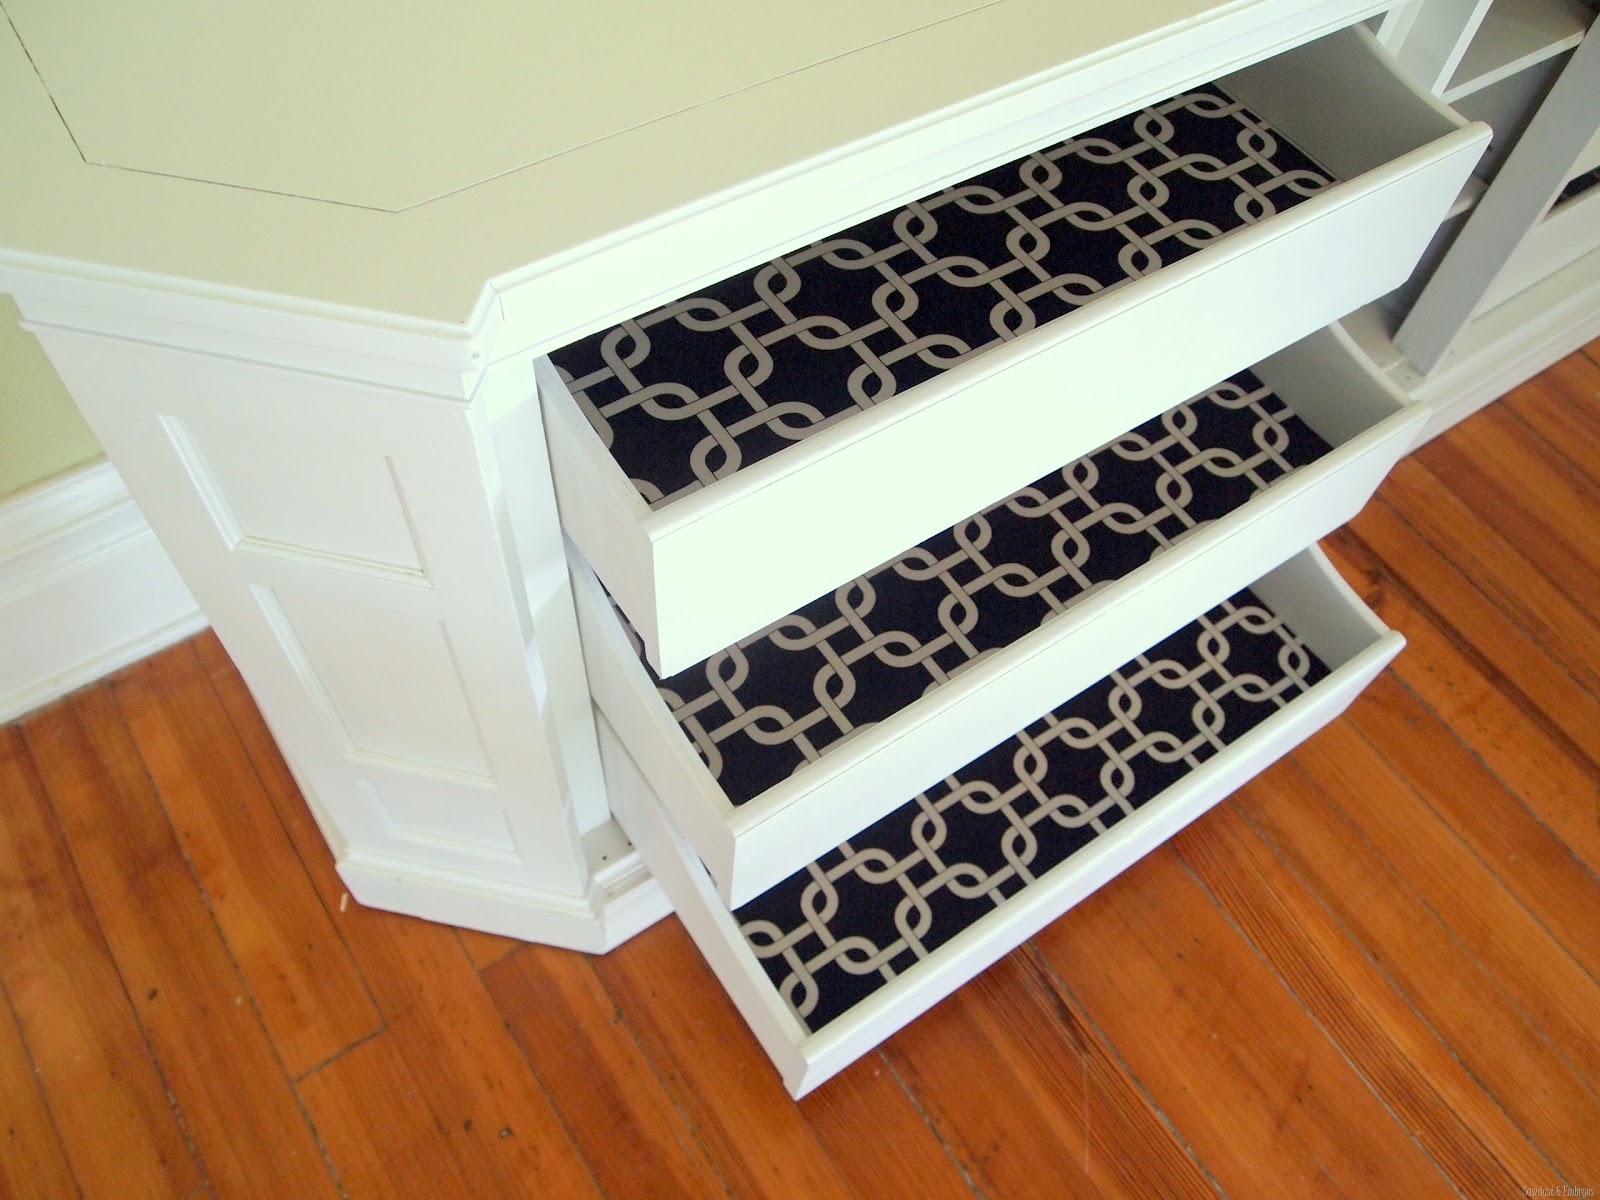 [Lining%2520Drawers%2520with%2520Fabric%2520%257BSawdust%2520%2526%2520Embryos%257D%255B11%255D.jpg]